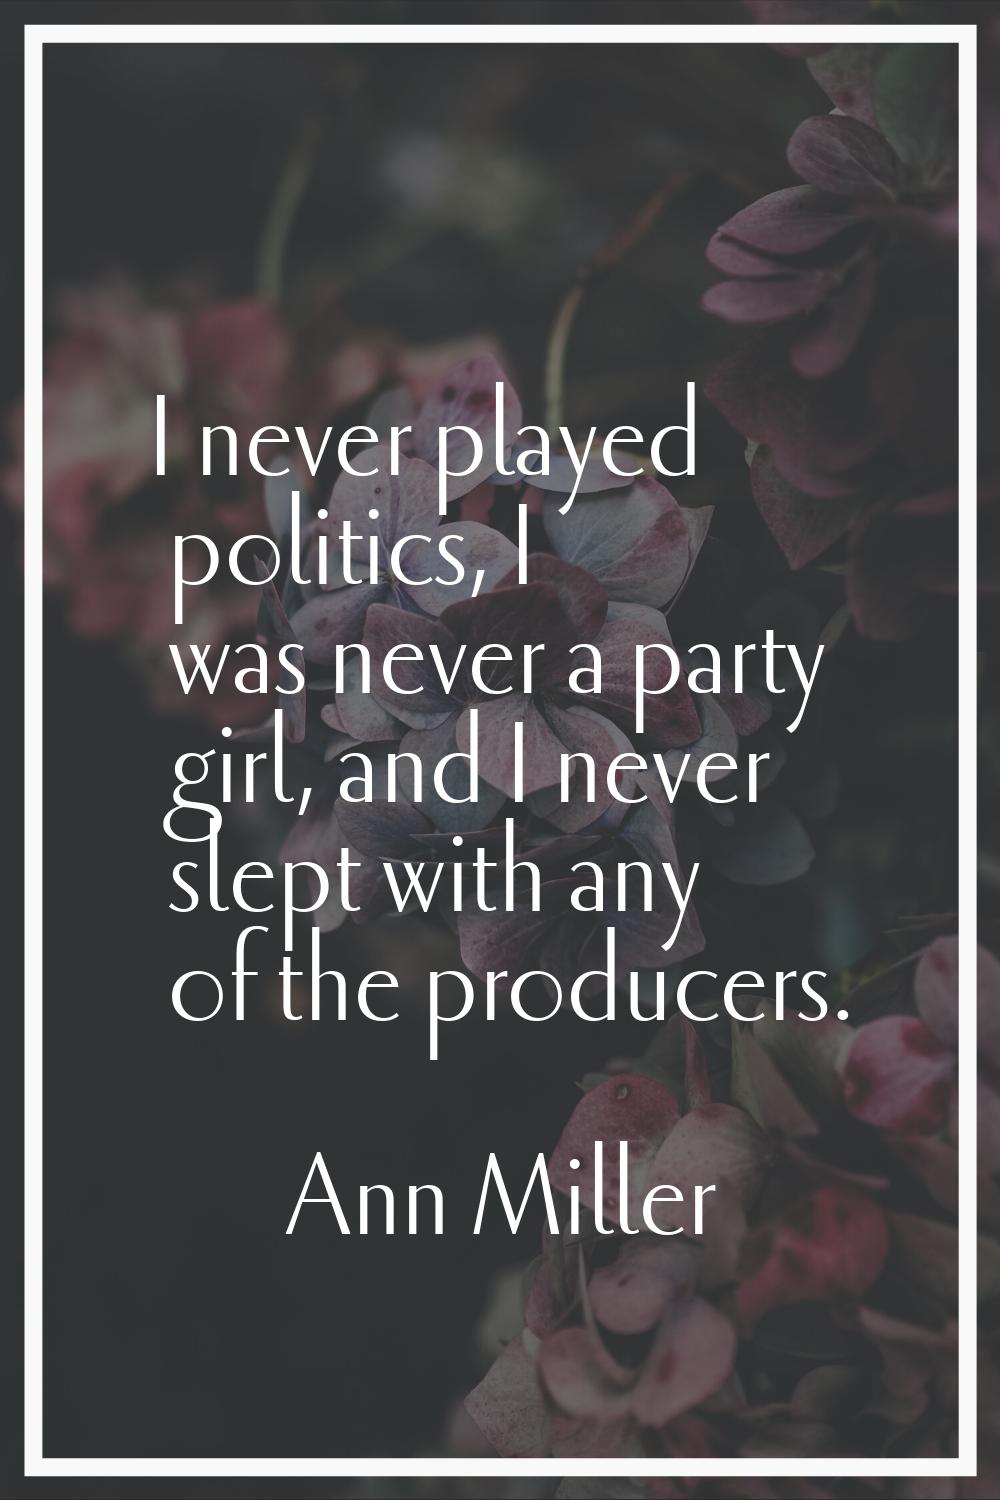 I never played politics, I was never a party girl, and I never slept with any of the producers.